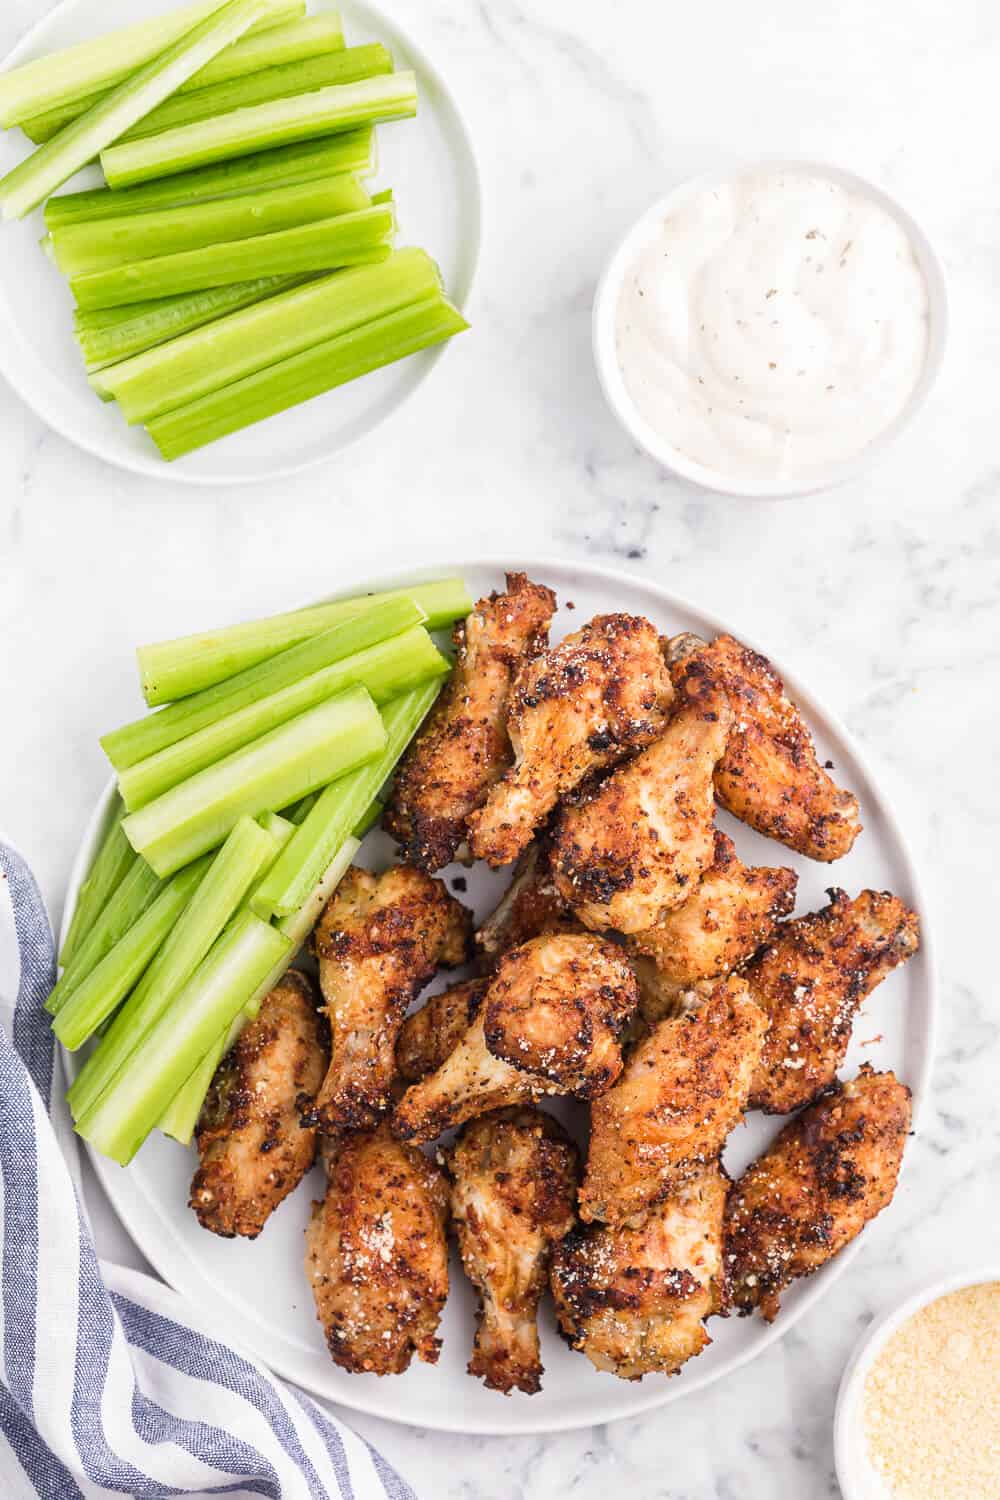 Air Fryer Chicken Wings Recipe - Use your air fryer to make the best crispy chicken wings in minutes! This easy appetizer is covered in a garlic, lemon pepper and Parmesan marinade for the most delicious flavor.